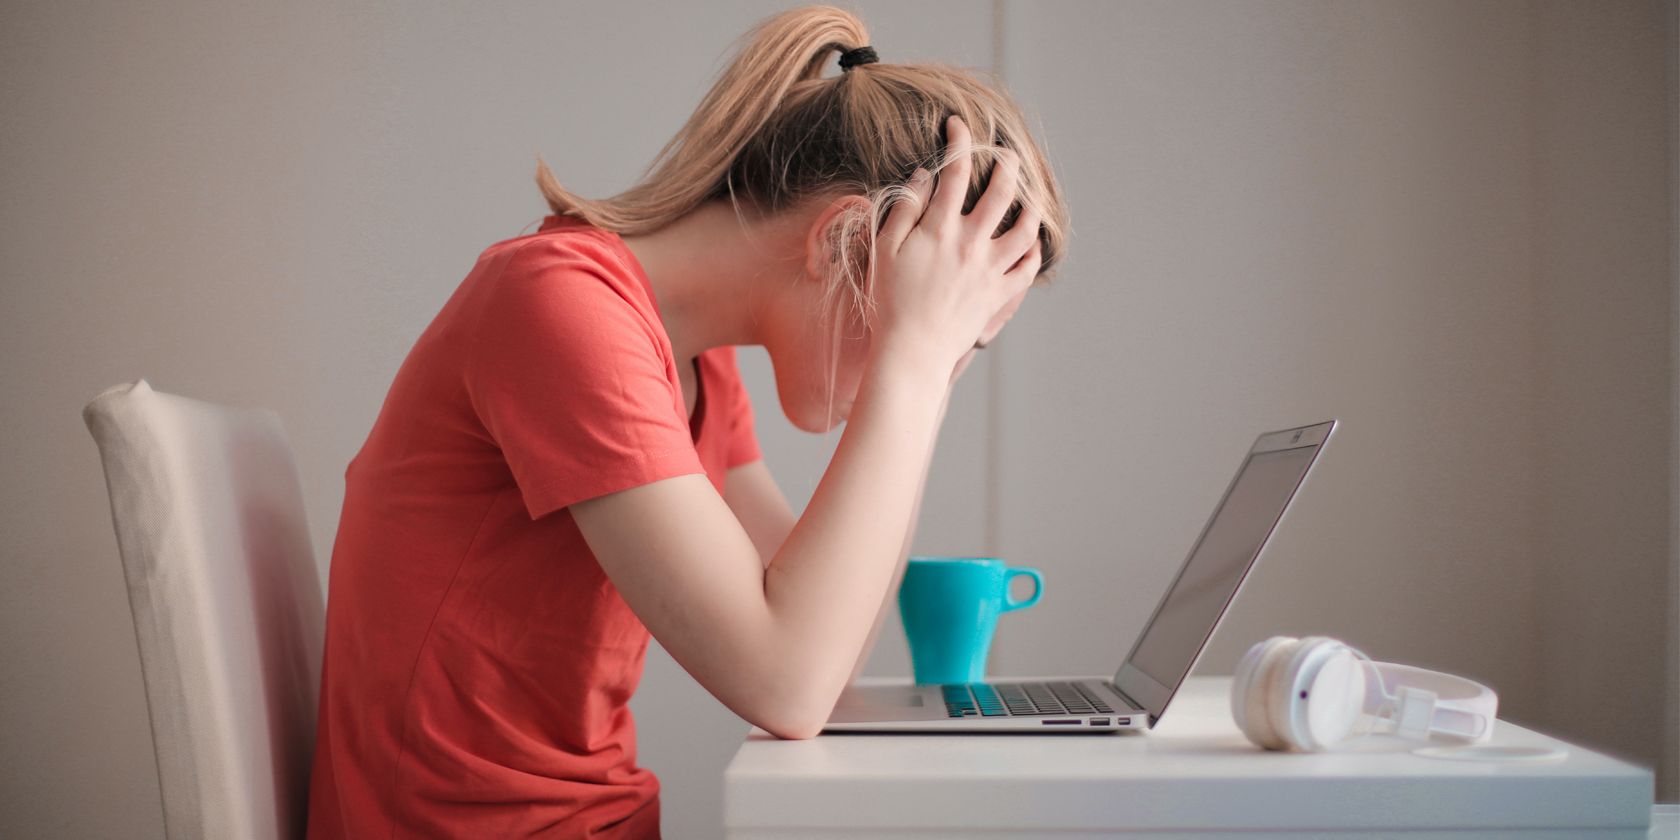 6 Ways to Cope With Stress Using Technology